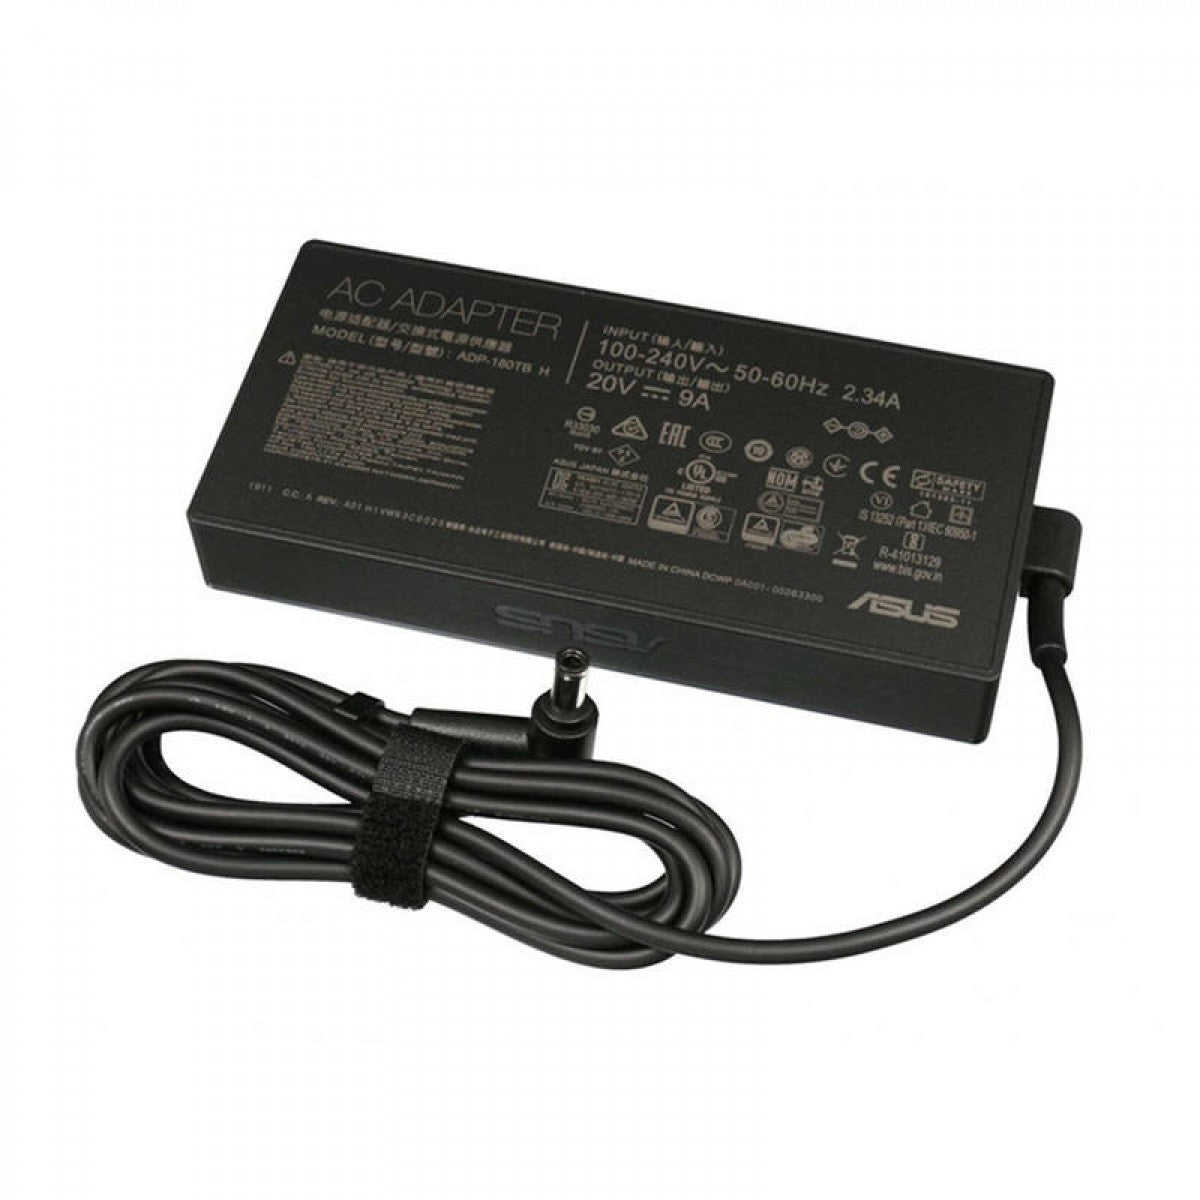 Asus Laptop AC Adapter Charger 20V 9A 180W (Plug Size: 6.0x3.7mm)